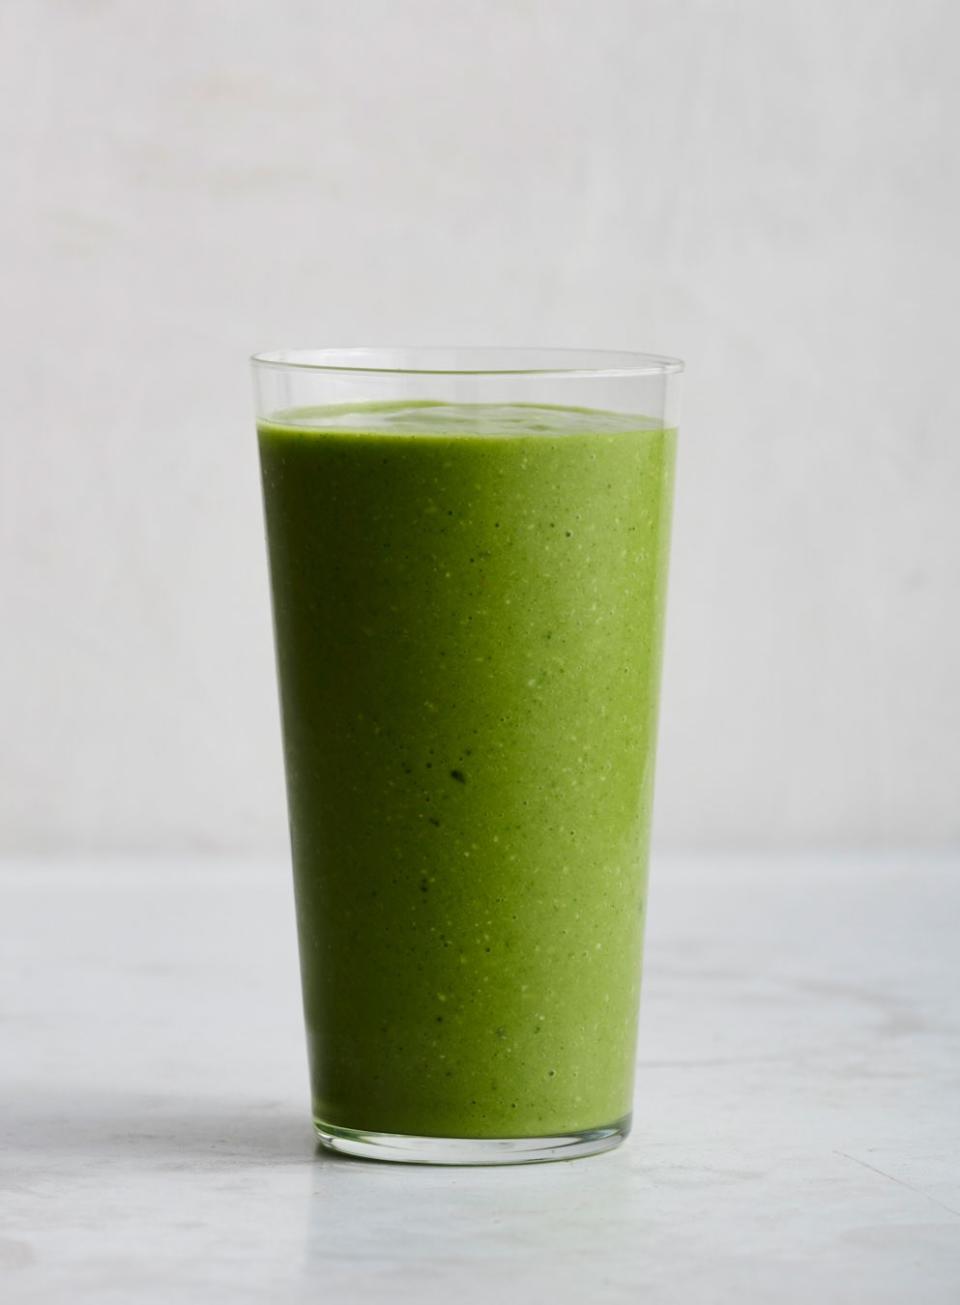 Avocado, Kale, Pineapple, and Coconut Smoothie